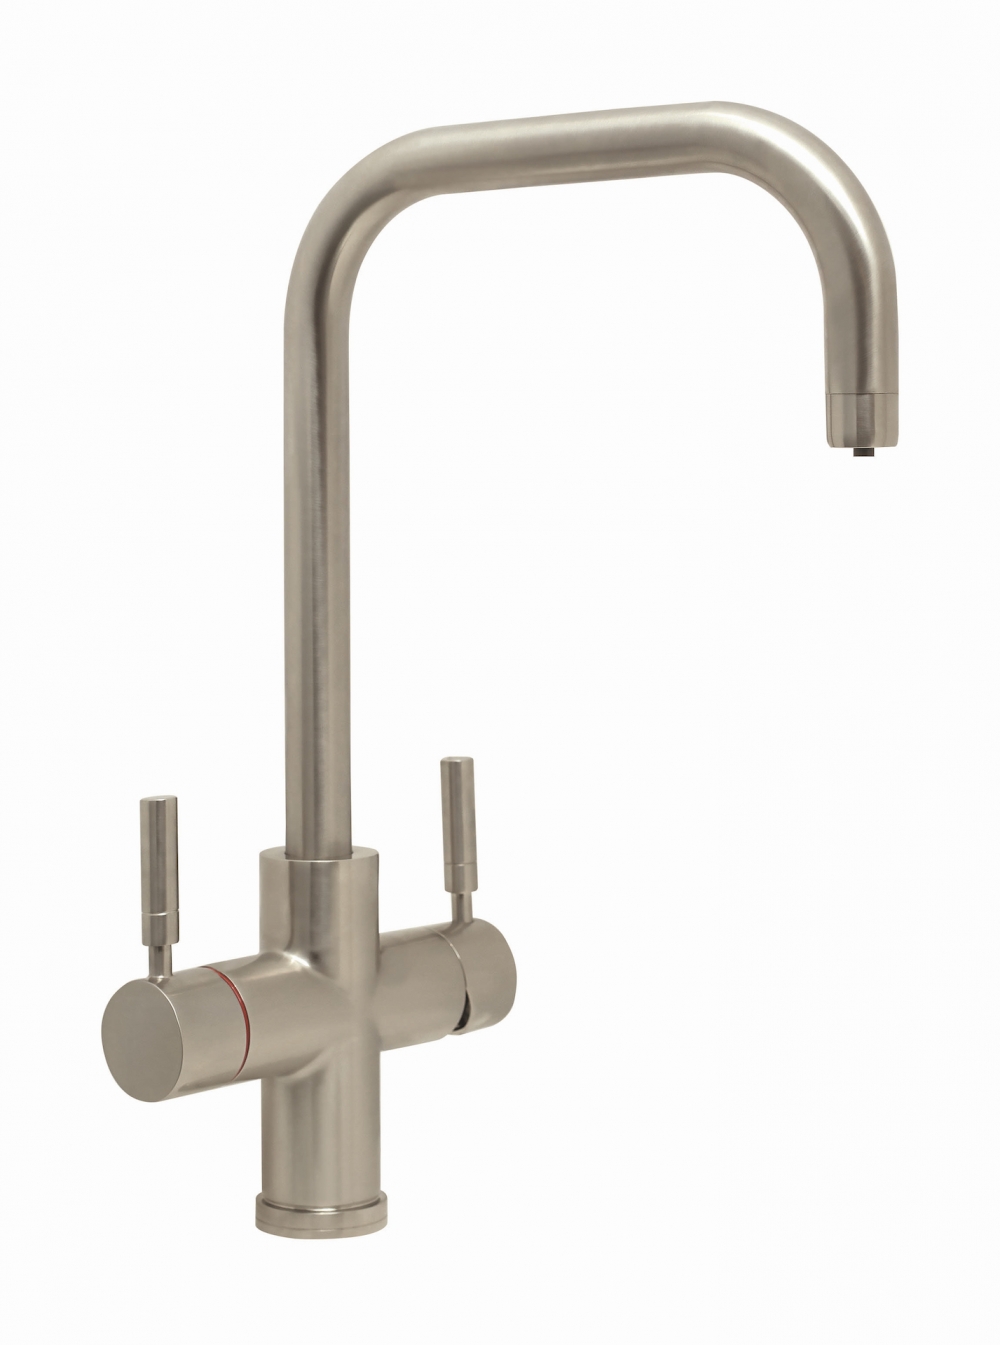 cda th101br is a 3 in 1 instant hot water tap in brushed steel